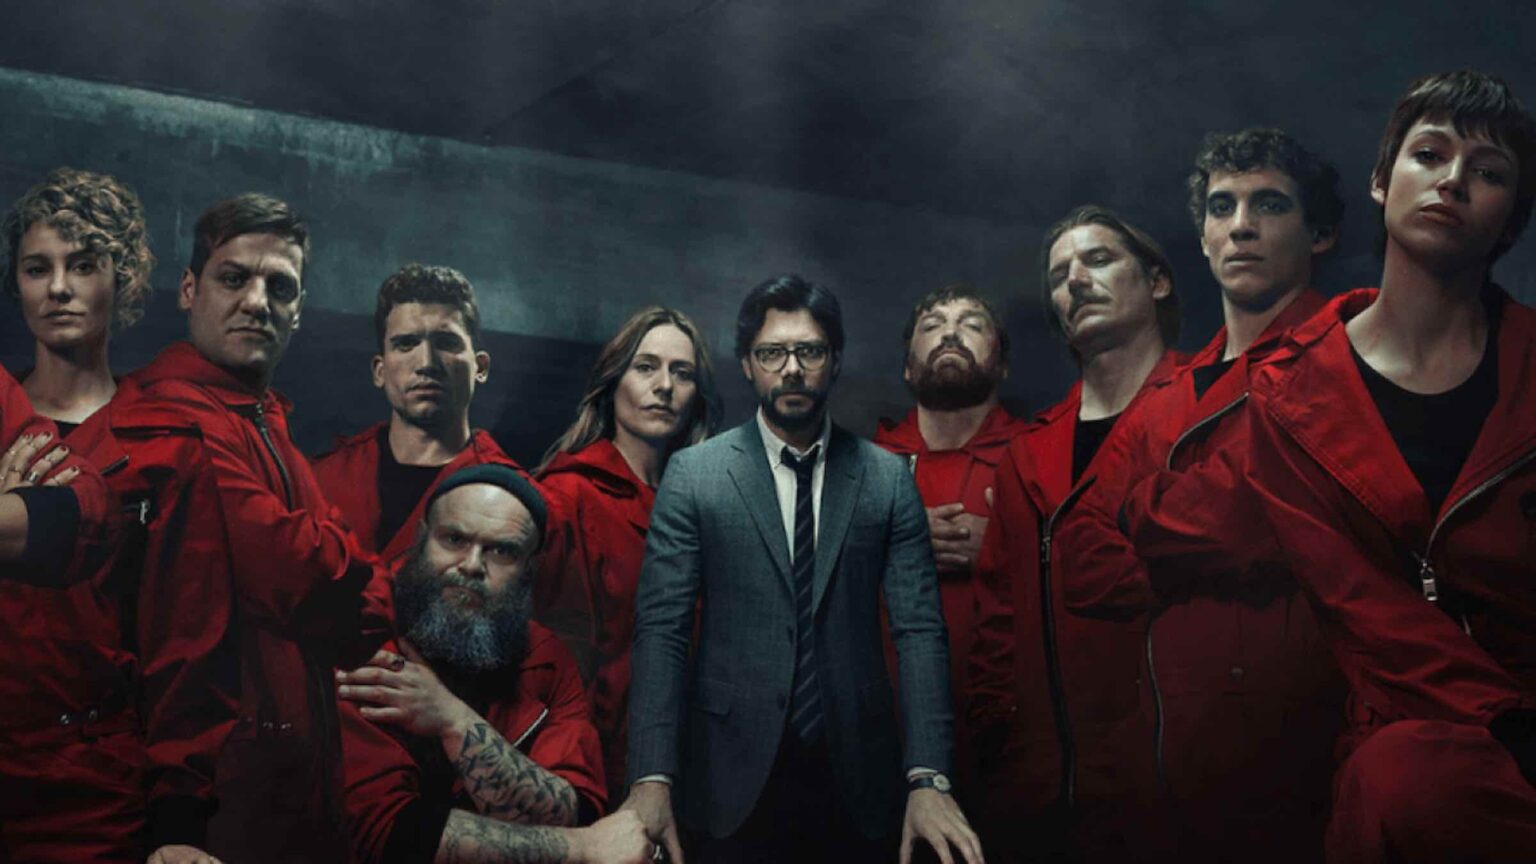 This week, Netflix announced the upcoming fifth season of Money Heist will also be the show’s last. We believe the show deserves to go longer.